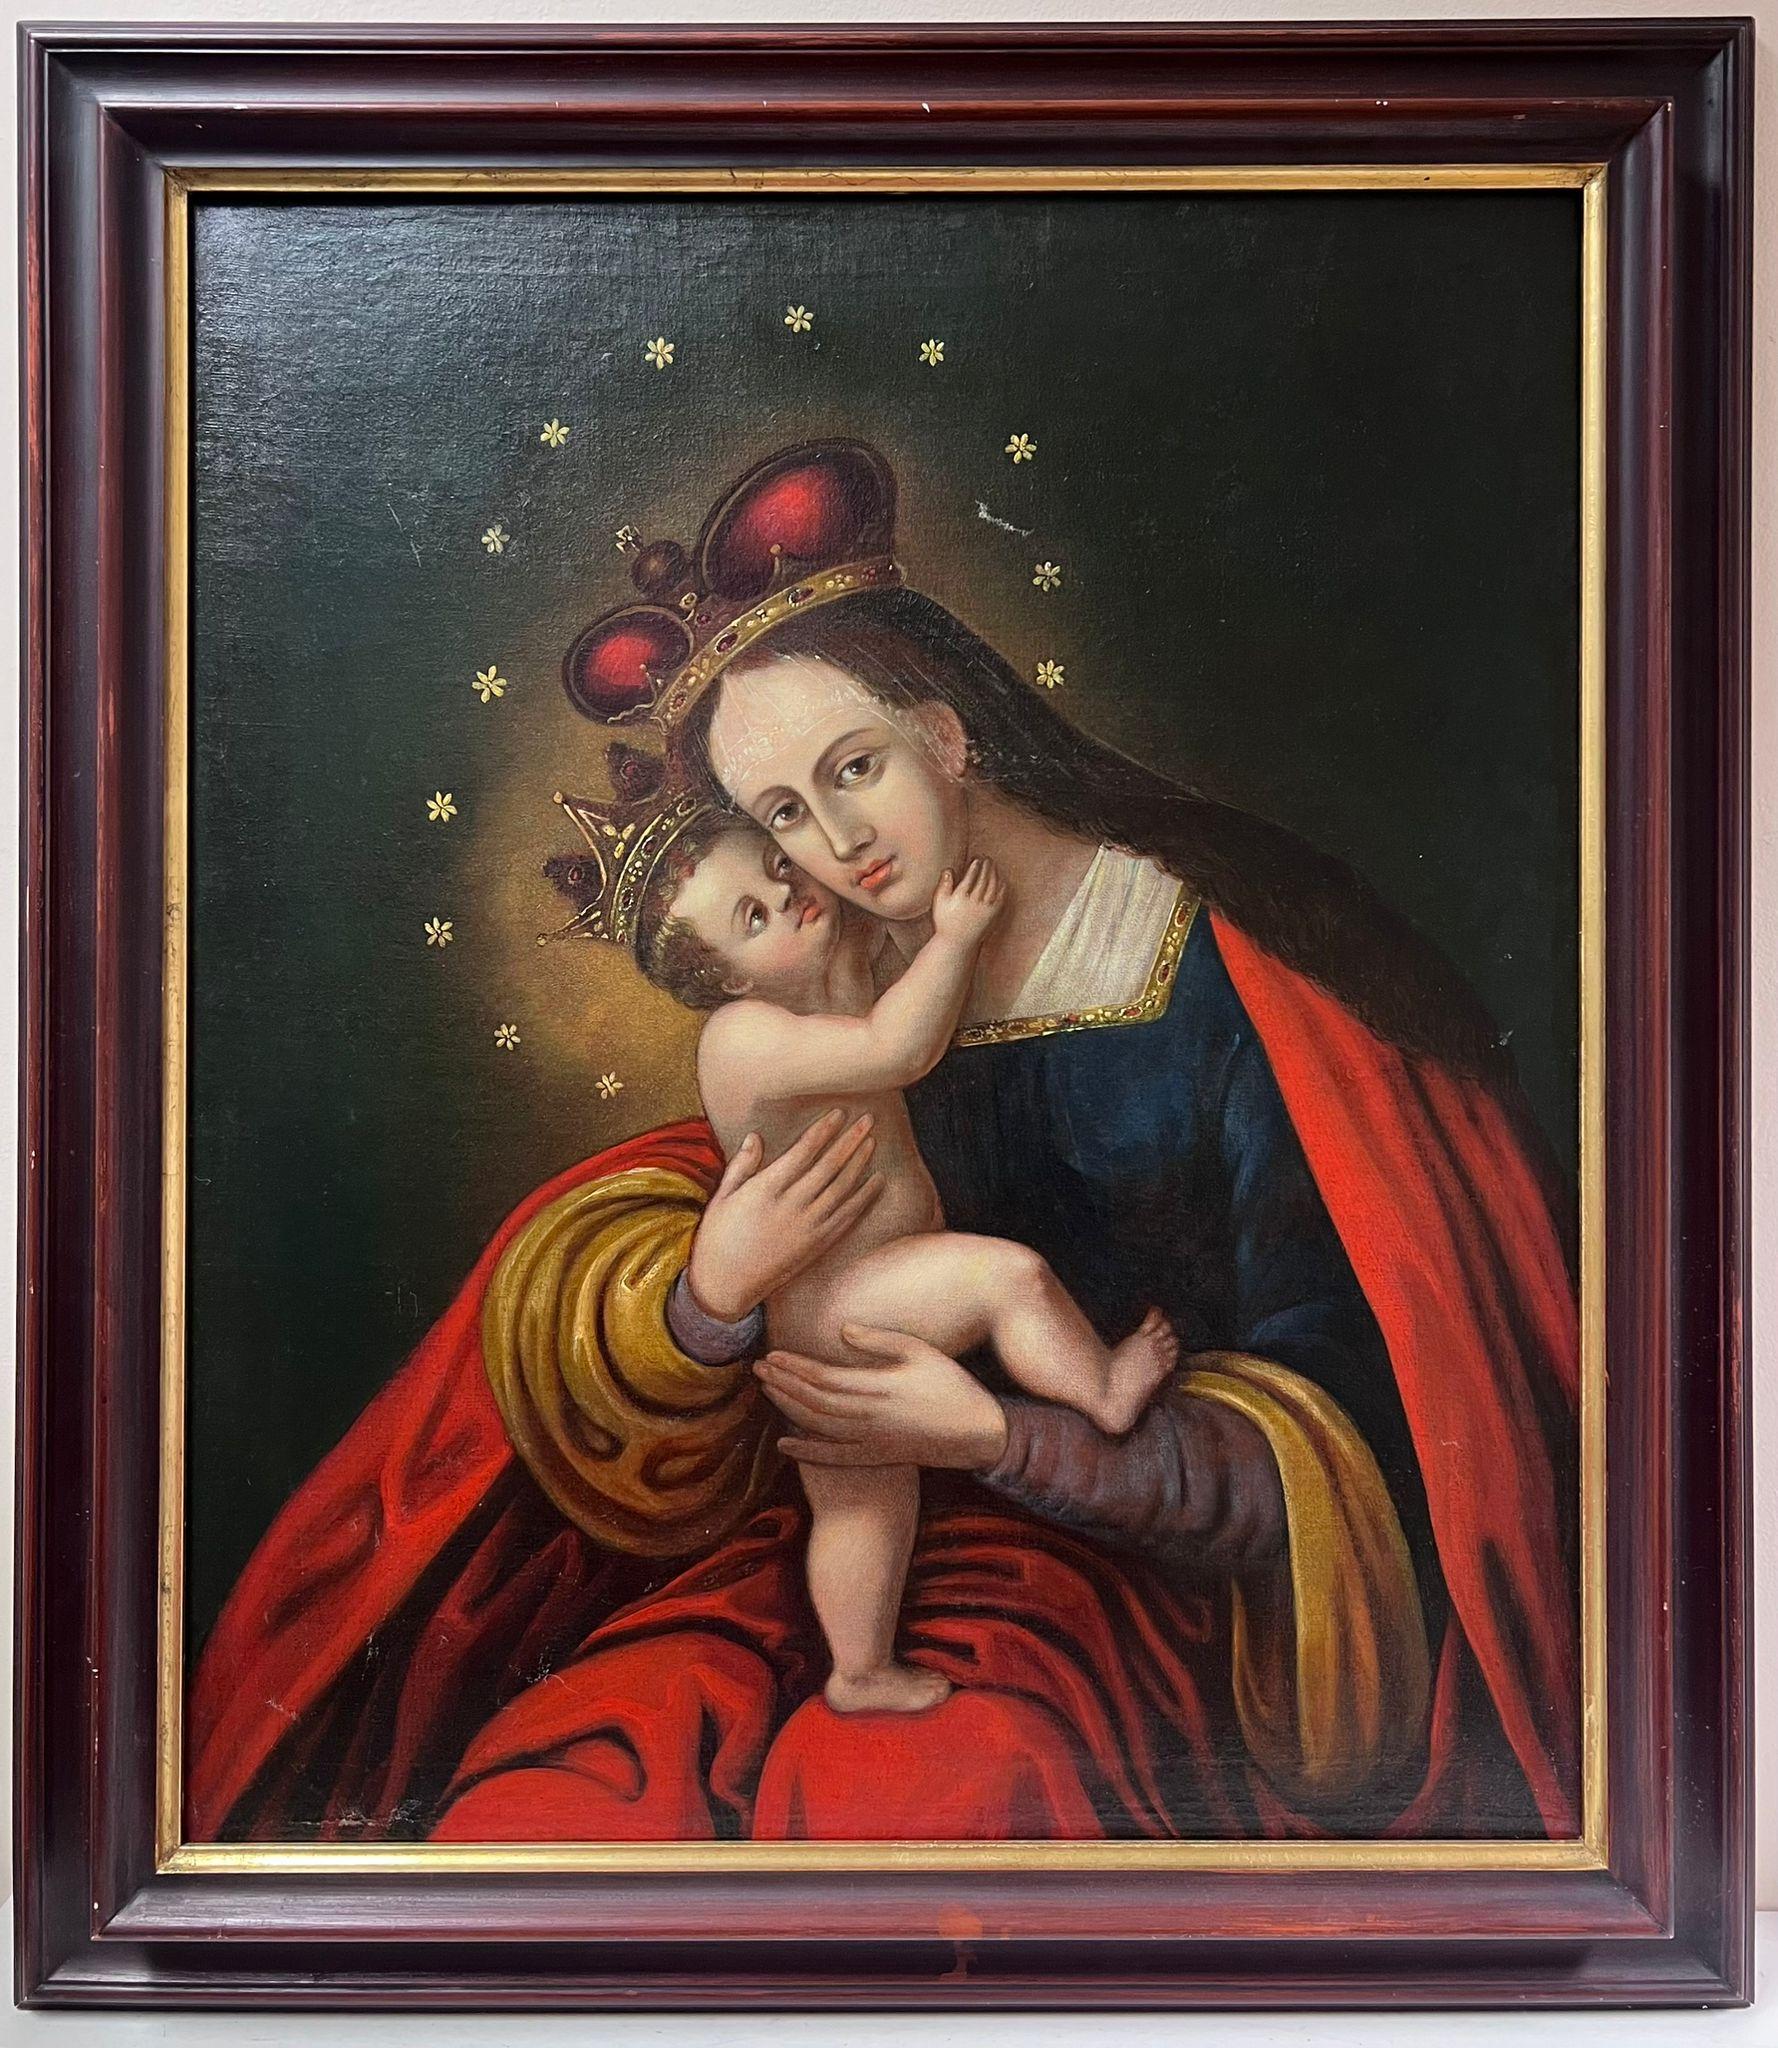 The Madonna and Christ Child
Eastern European artist, circa 1800's
oil on canvas, framed
framed: 31 x 27 inches
board: 26 x 22 inches
provenance: private collection, London
condition: very good and sound condition 